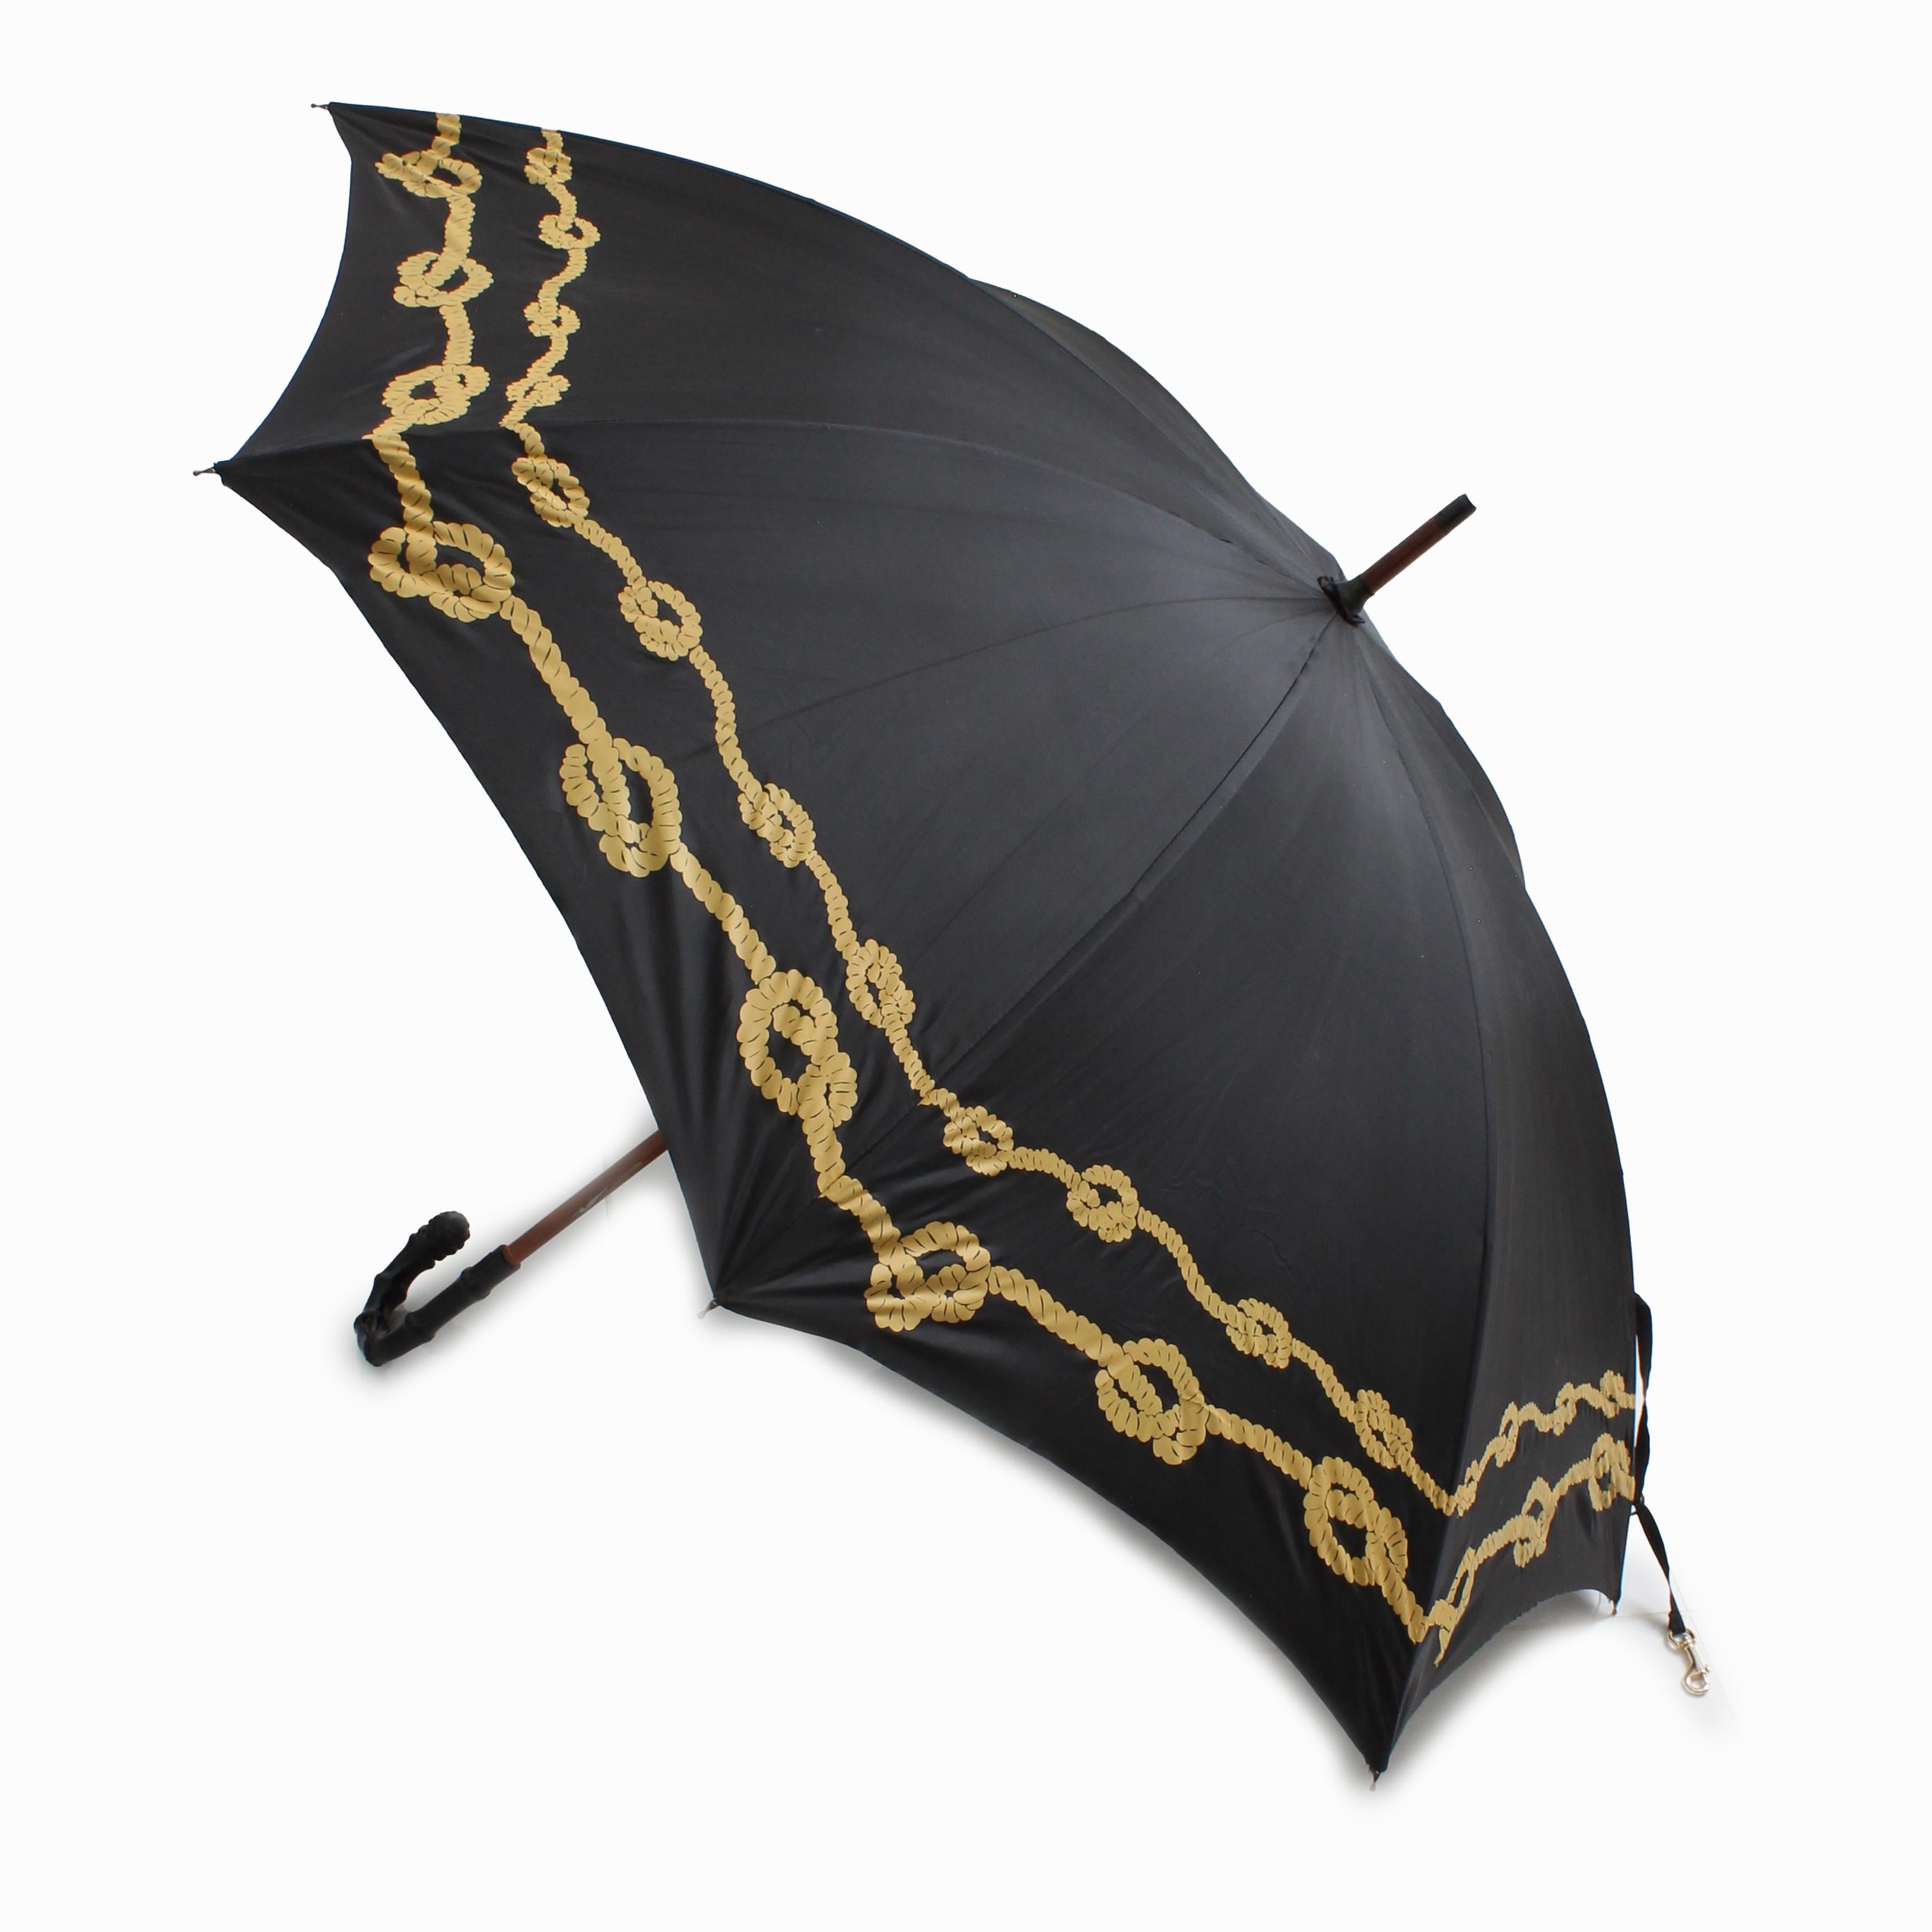 Preowned, vintage Bonnie Cashin for D. Klein New York large umbrella, likely made in the 70s.  Made from black nylon fabric with a knotted gold rope motif, it features an ornate carved black handle, a wooden shaft and a brass dog-leash cinch strap!